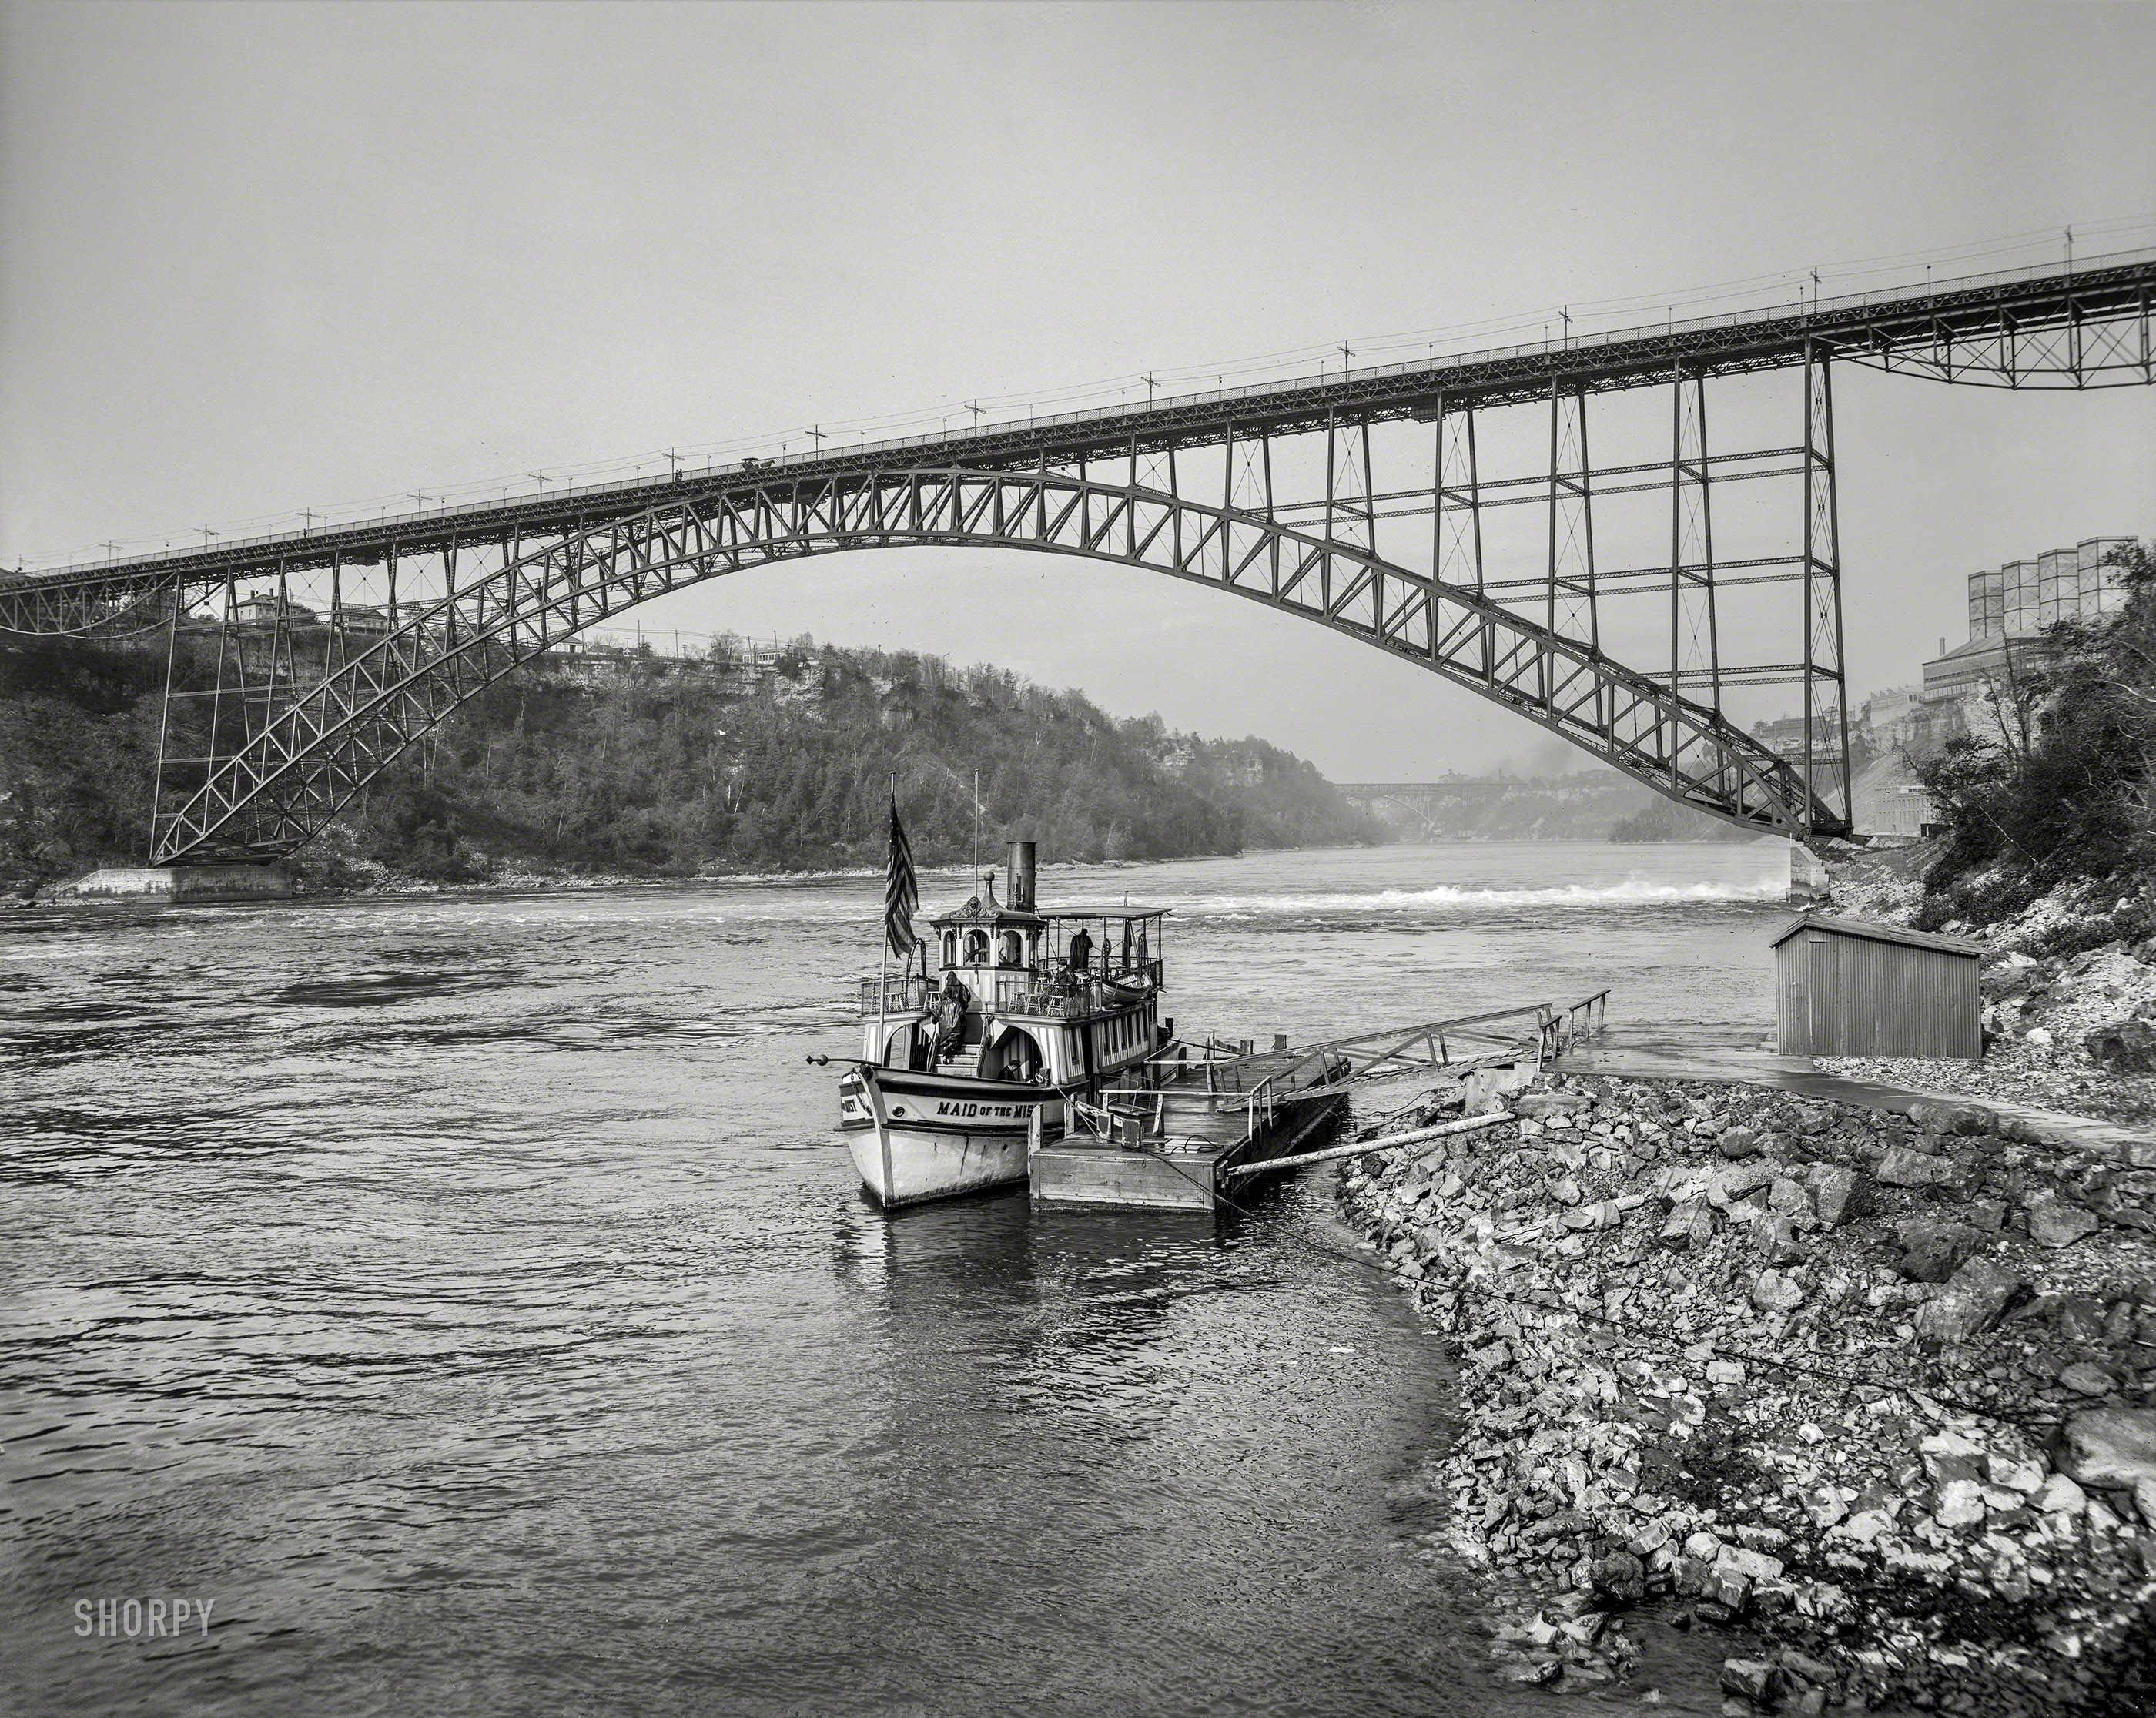 The Niagara River circa 1901. "International (Upper Steel Arch) Bridge from below at Niagara Falls." At the landing: The steamboat Maid of the Mist, "nymph of the mighty cataract." 8x10 inch dry plate glass negative. View full size.